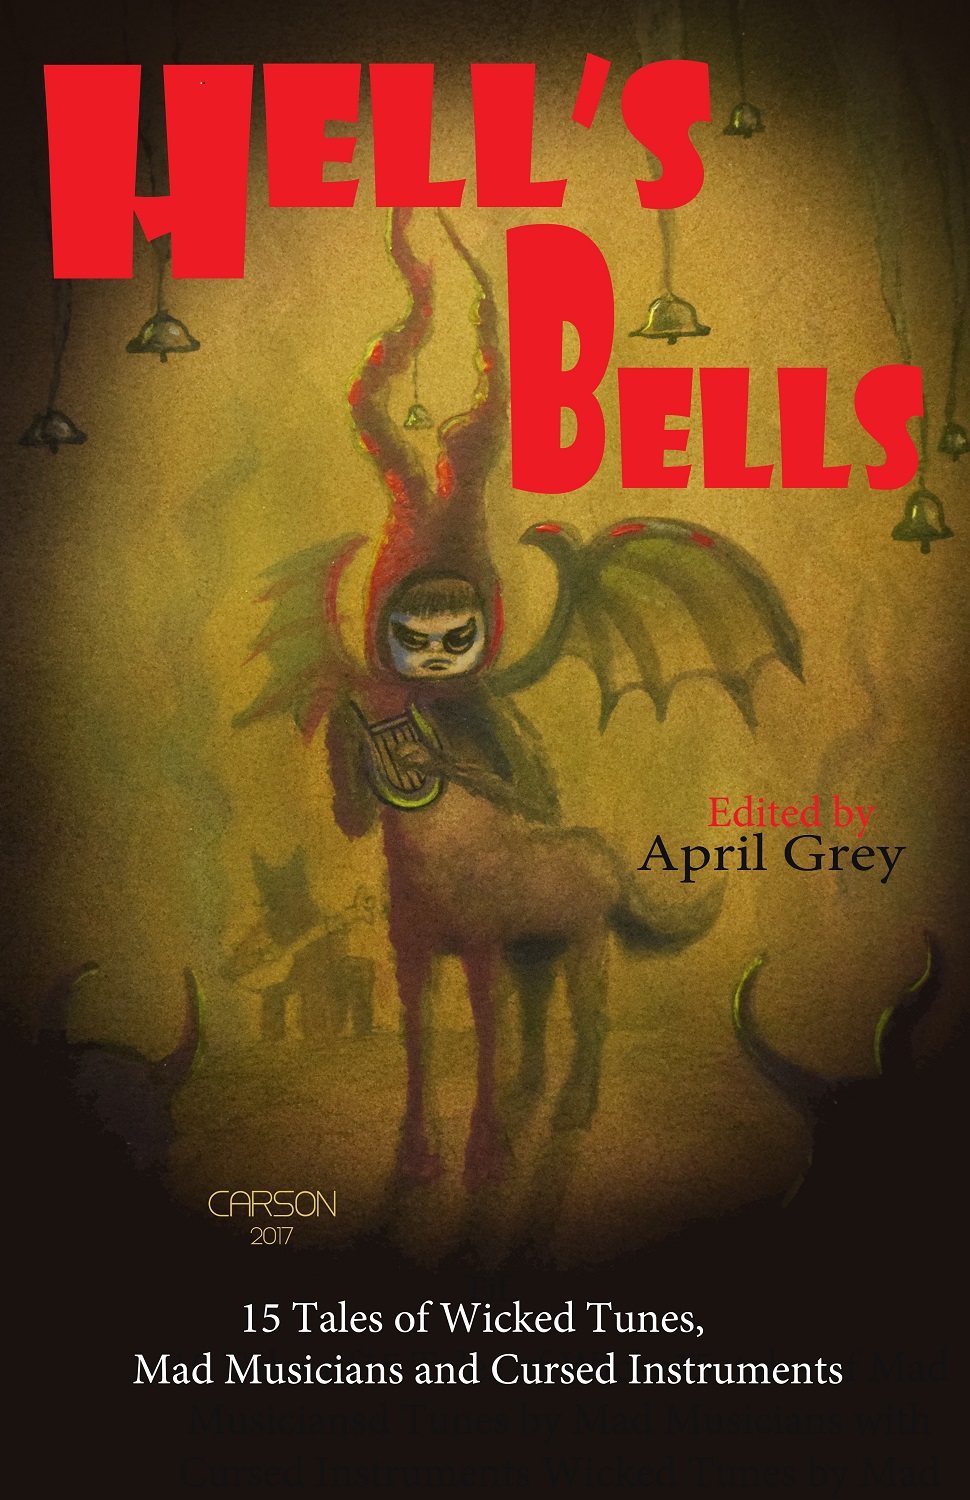 Hell's Bells Book Cover.jpg